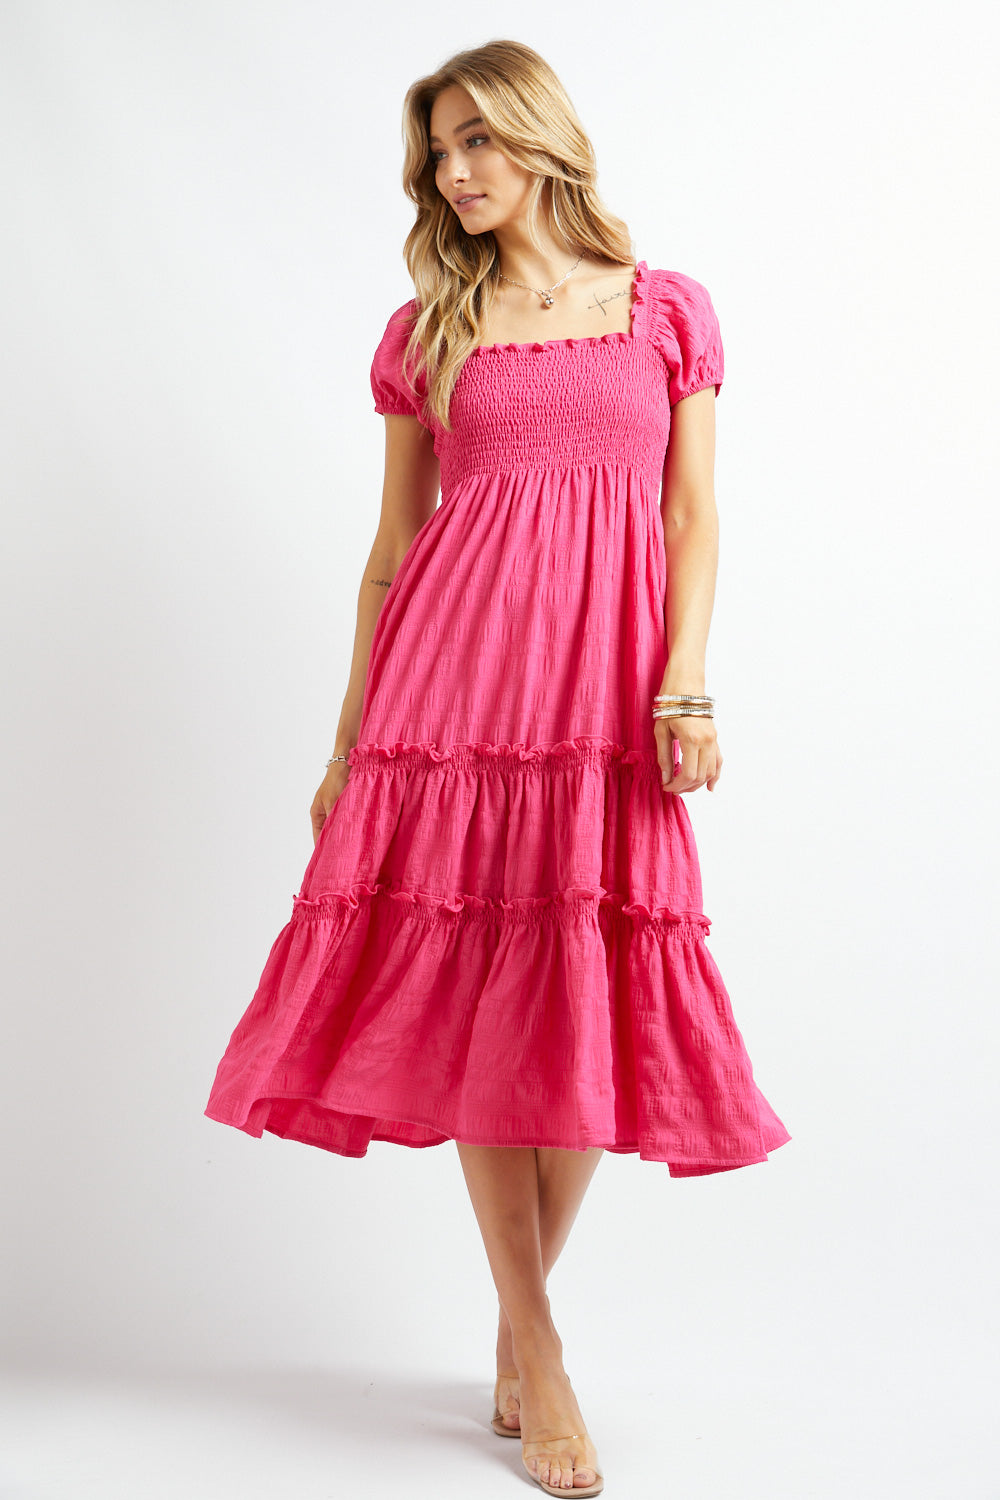 Smocked Pink Tiered Midi Dress - JustBelieve.Boutique